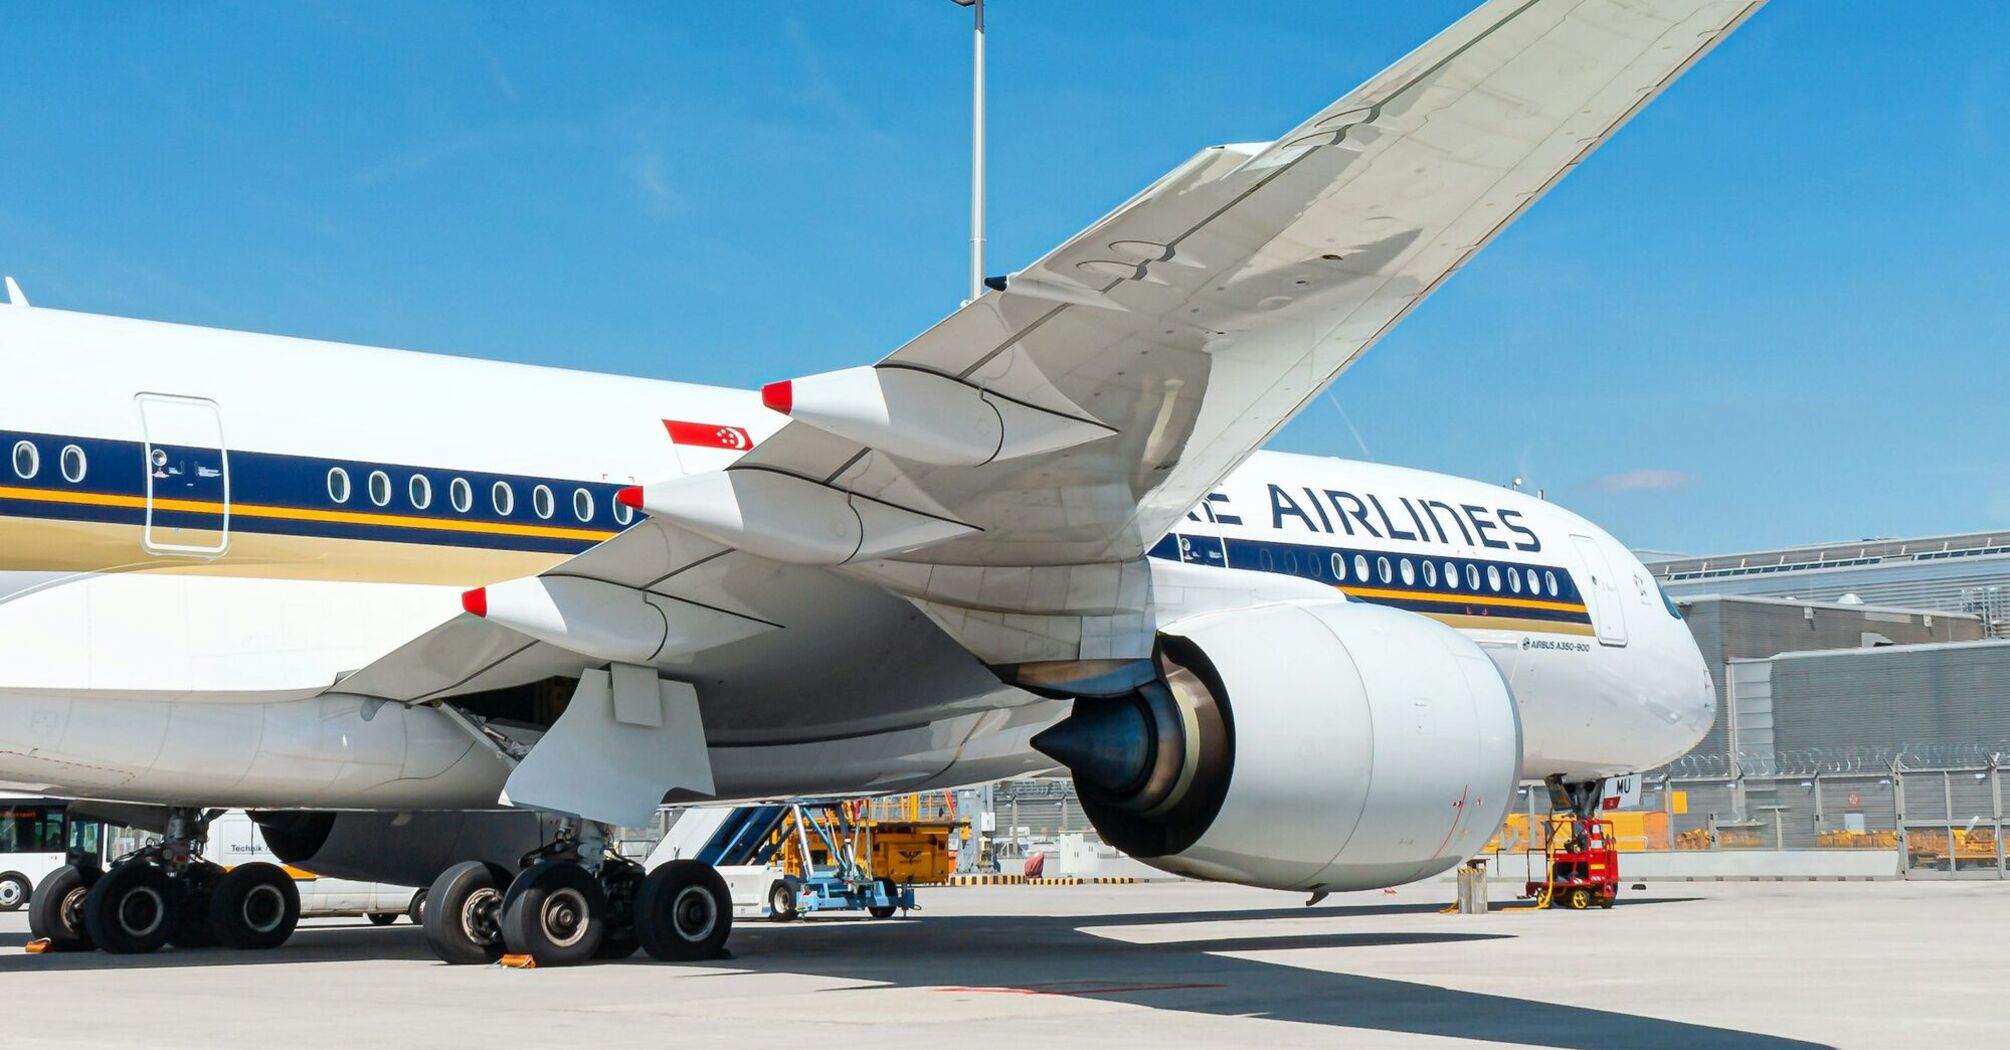 Airplane wingtip of Singapore Airlines aircraft